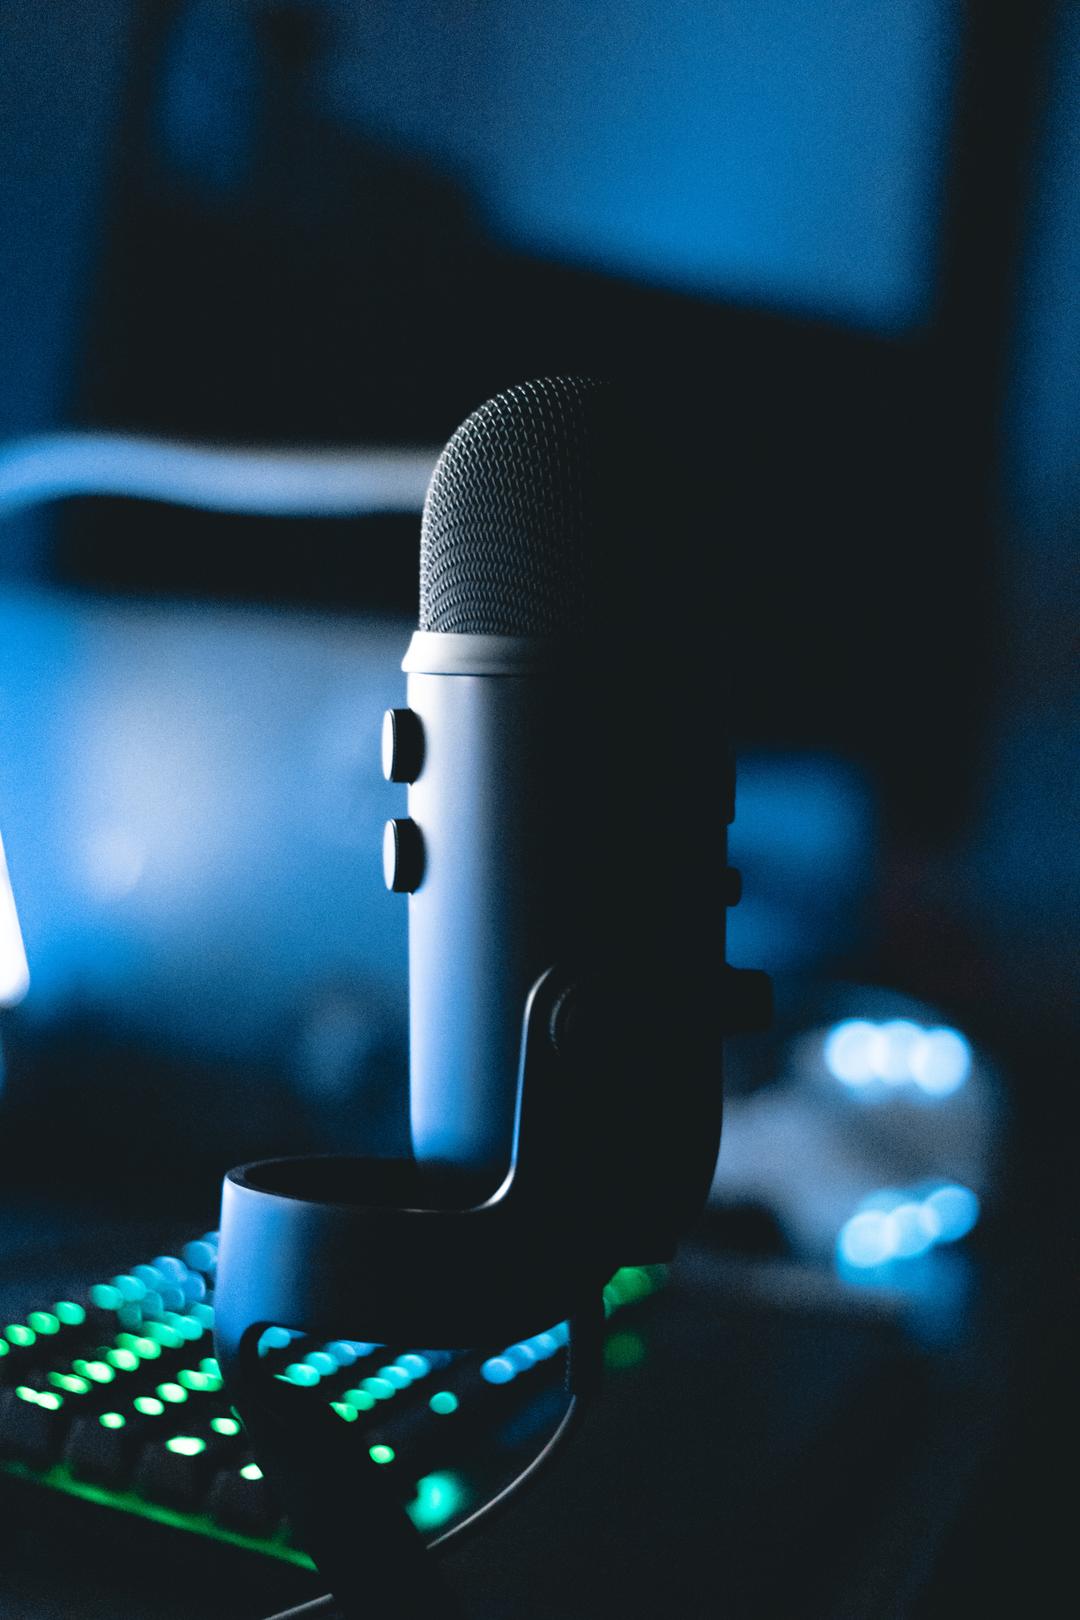 A Podcast Microphone Image